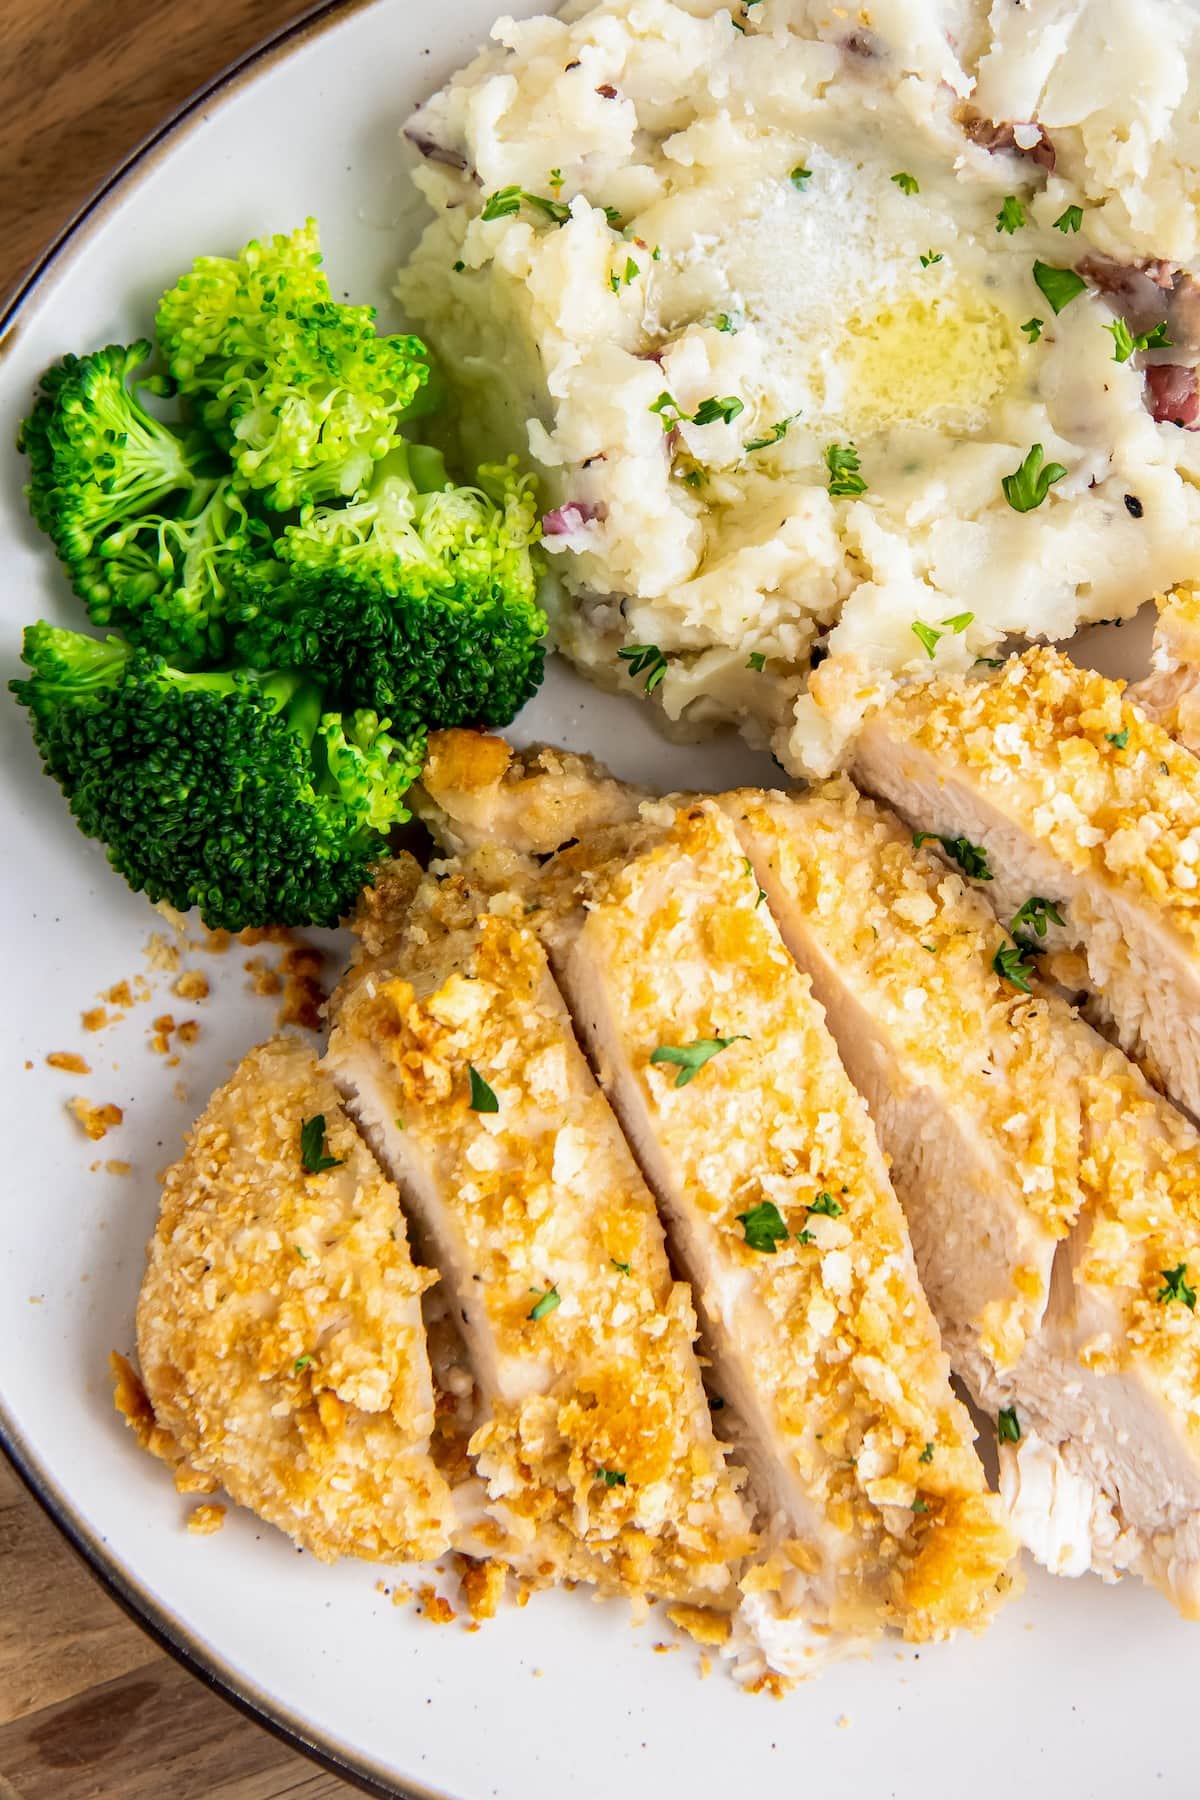 Crispy chicken breast with broccoli and mashed potatoes on a plate.